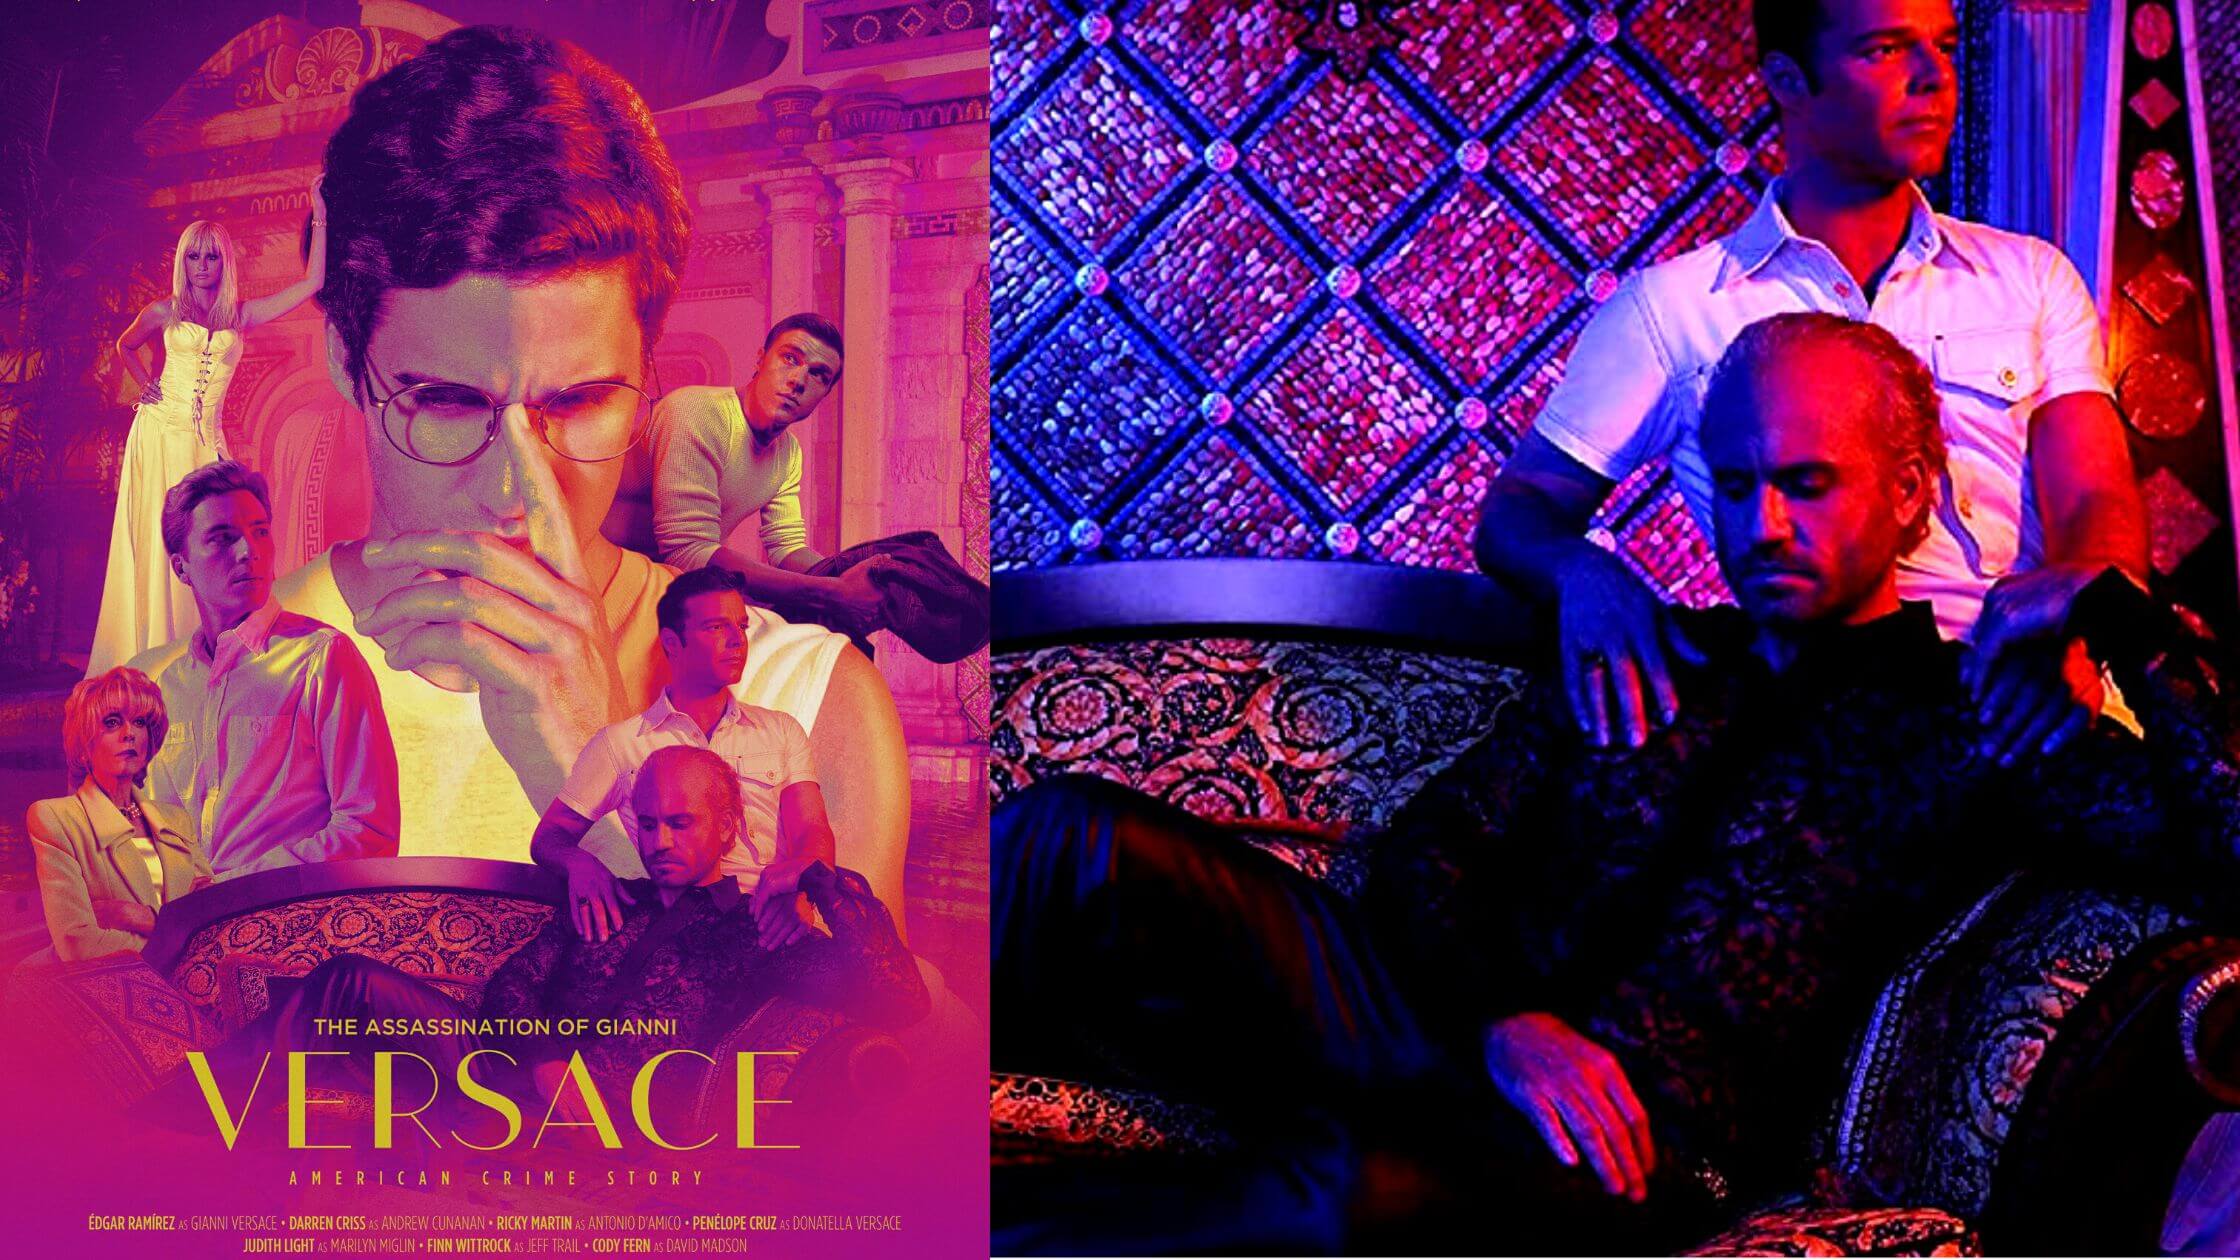 The Assassination Of Gianni Versace